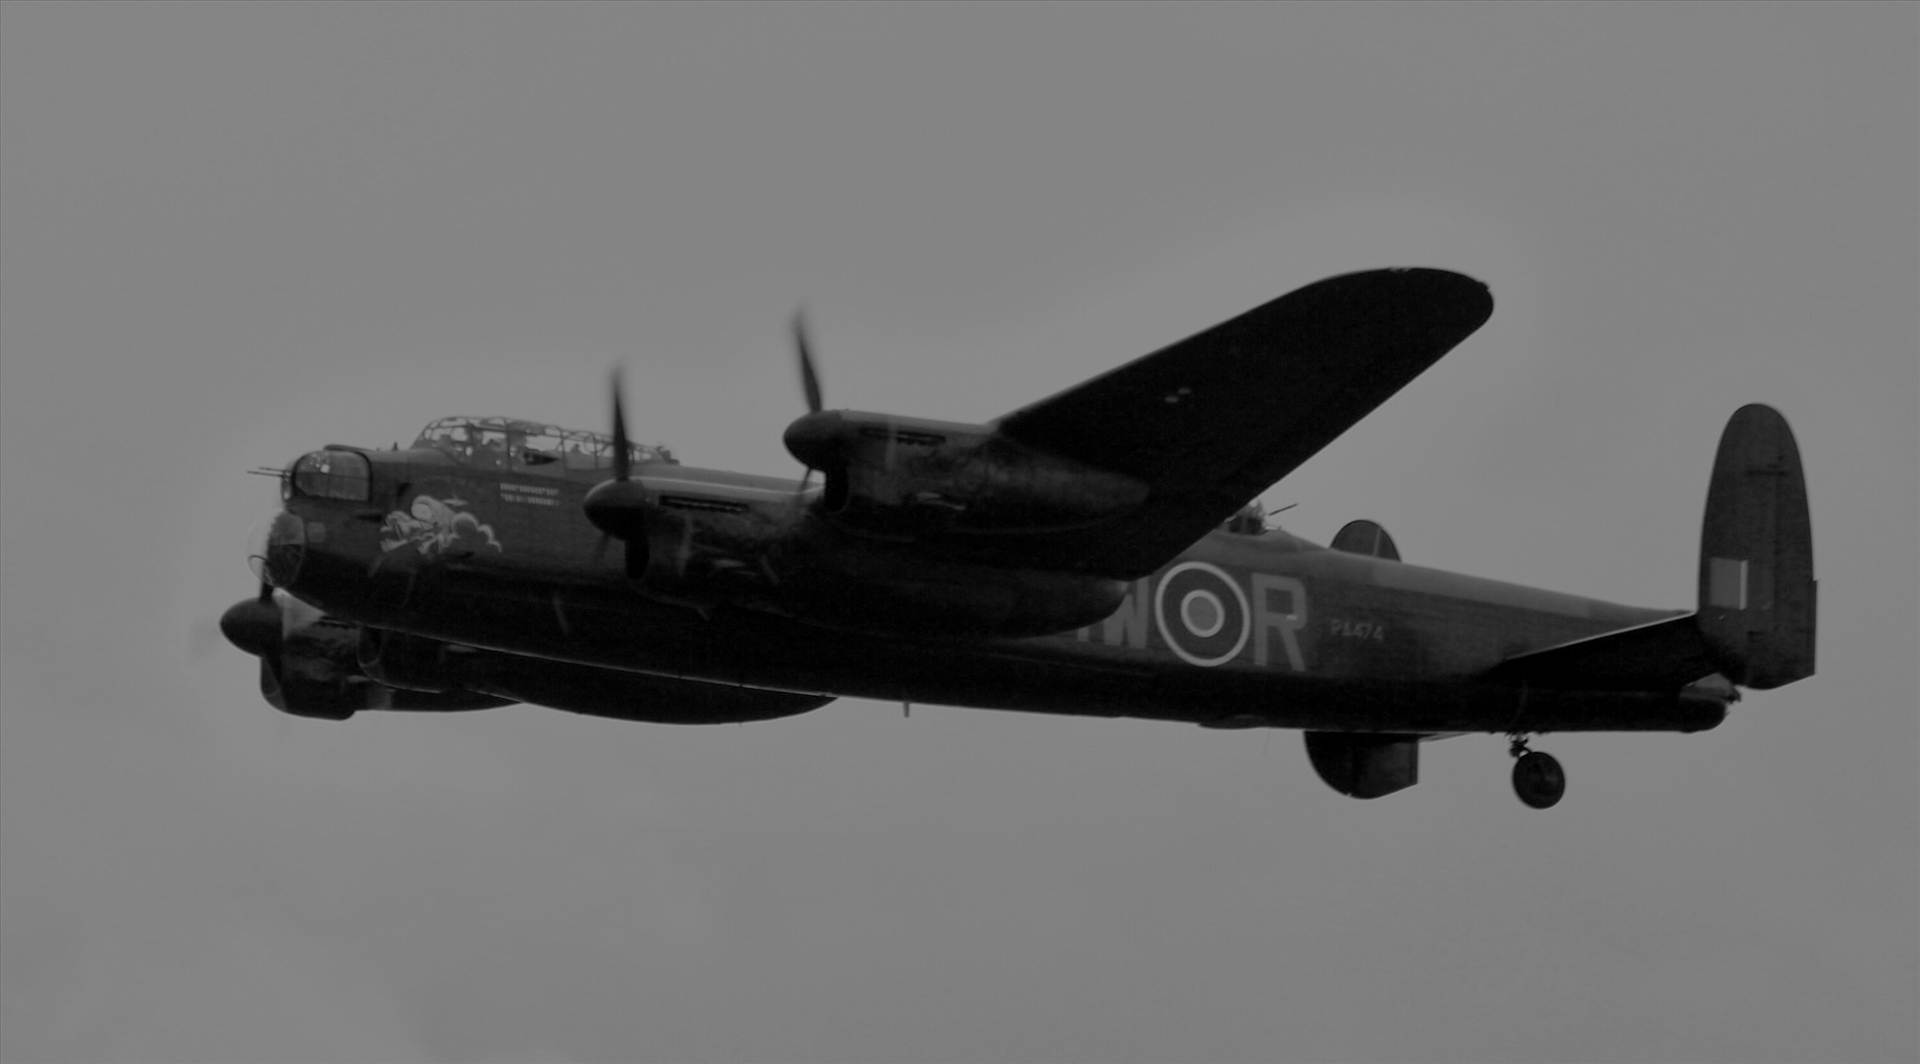 lancaster frm cosford airshow 2013-1.jpg  by WPC-21